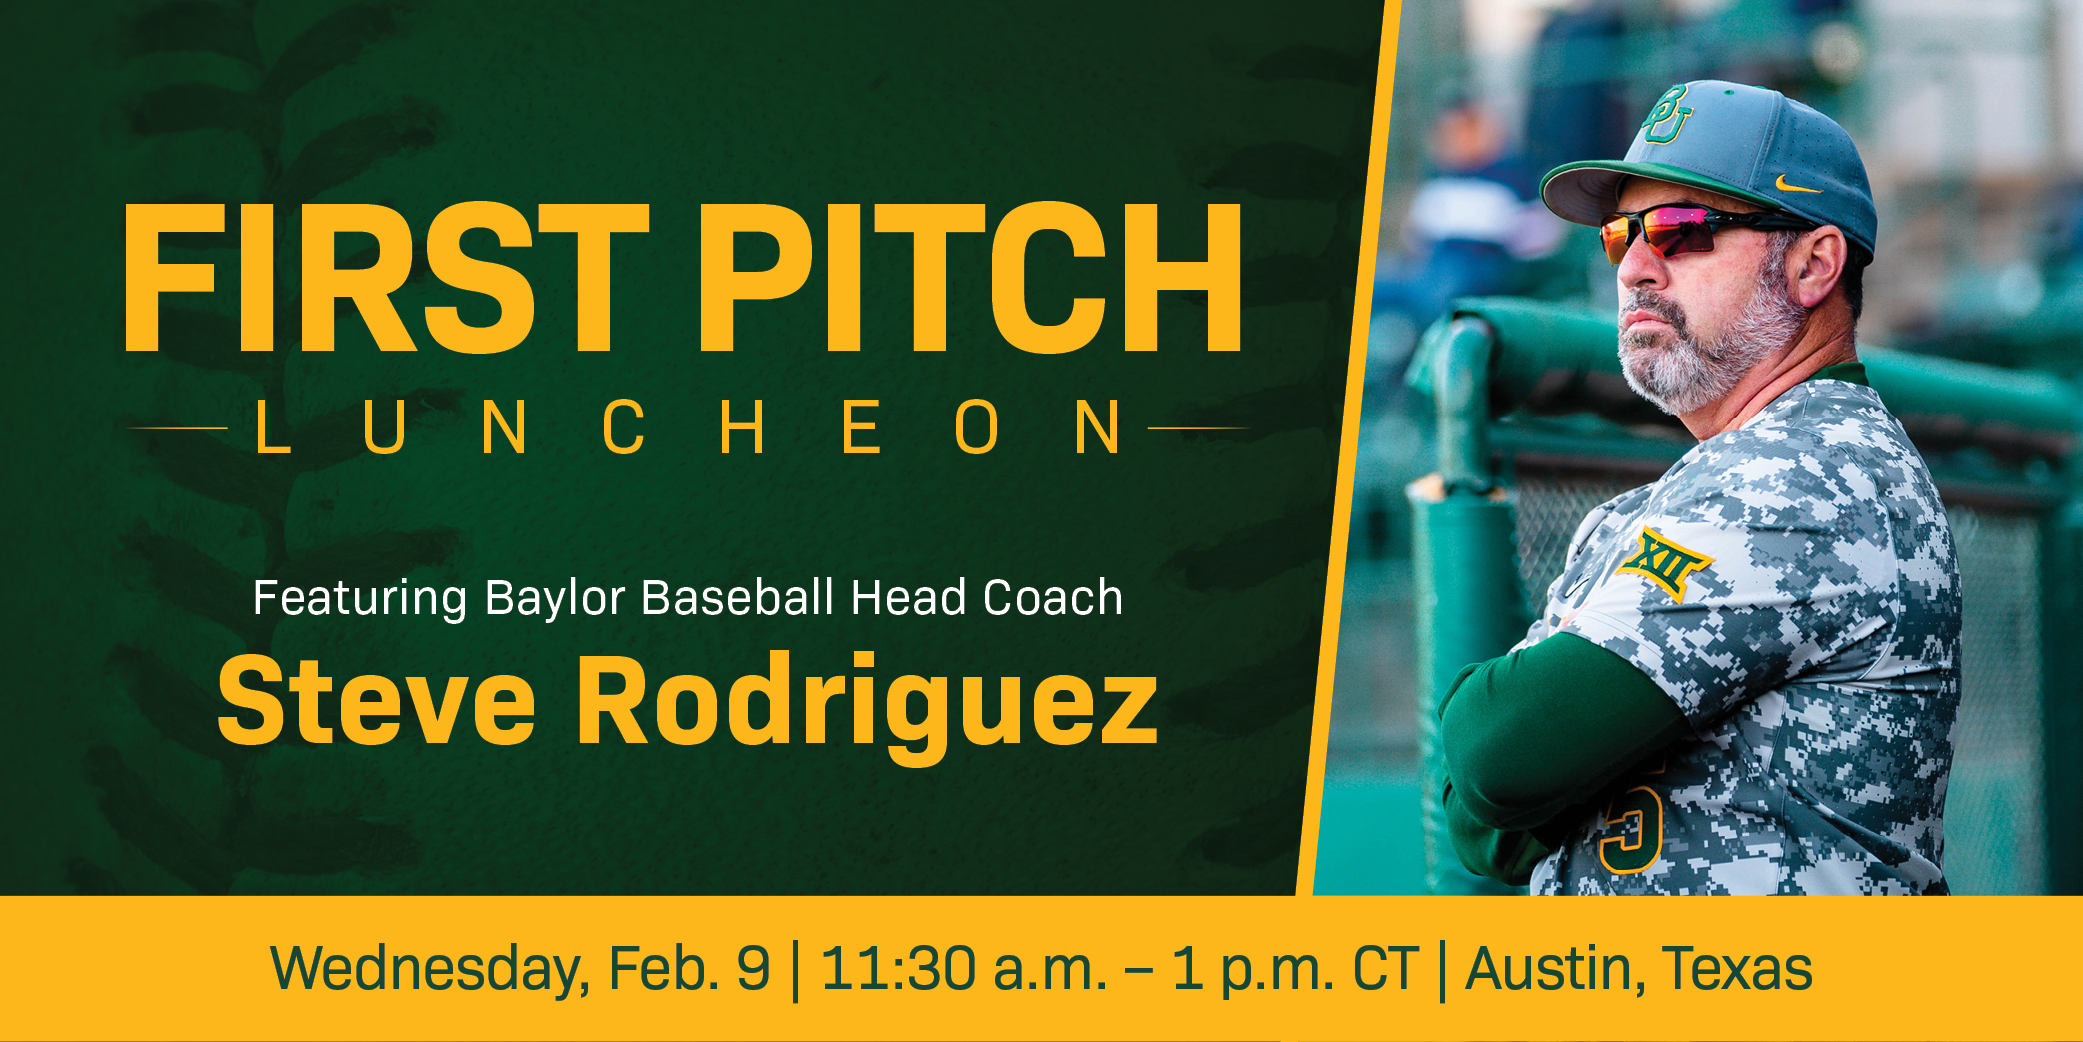 First Pitch Luncheon, Featuring Baseball Head Coach Steve Rodriguez